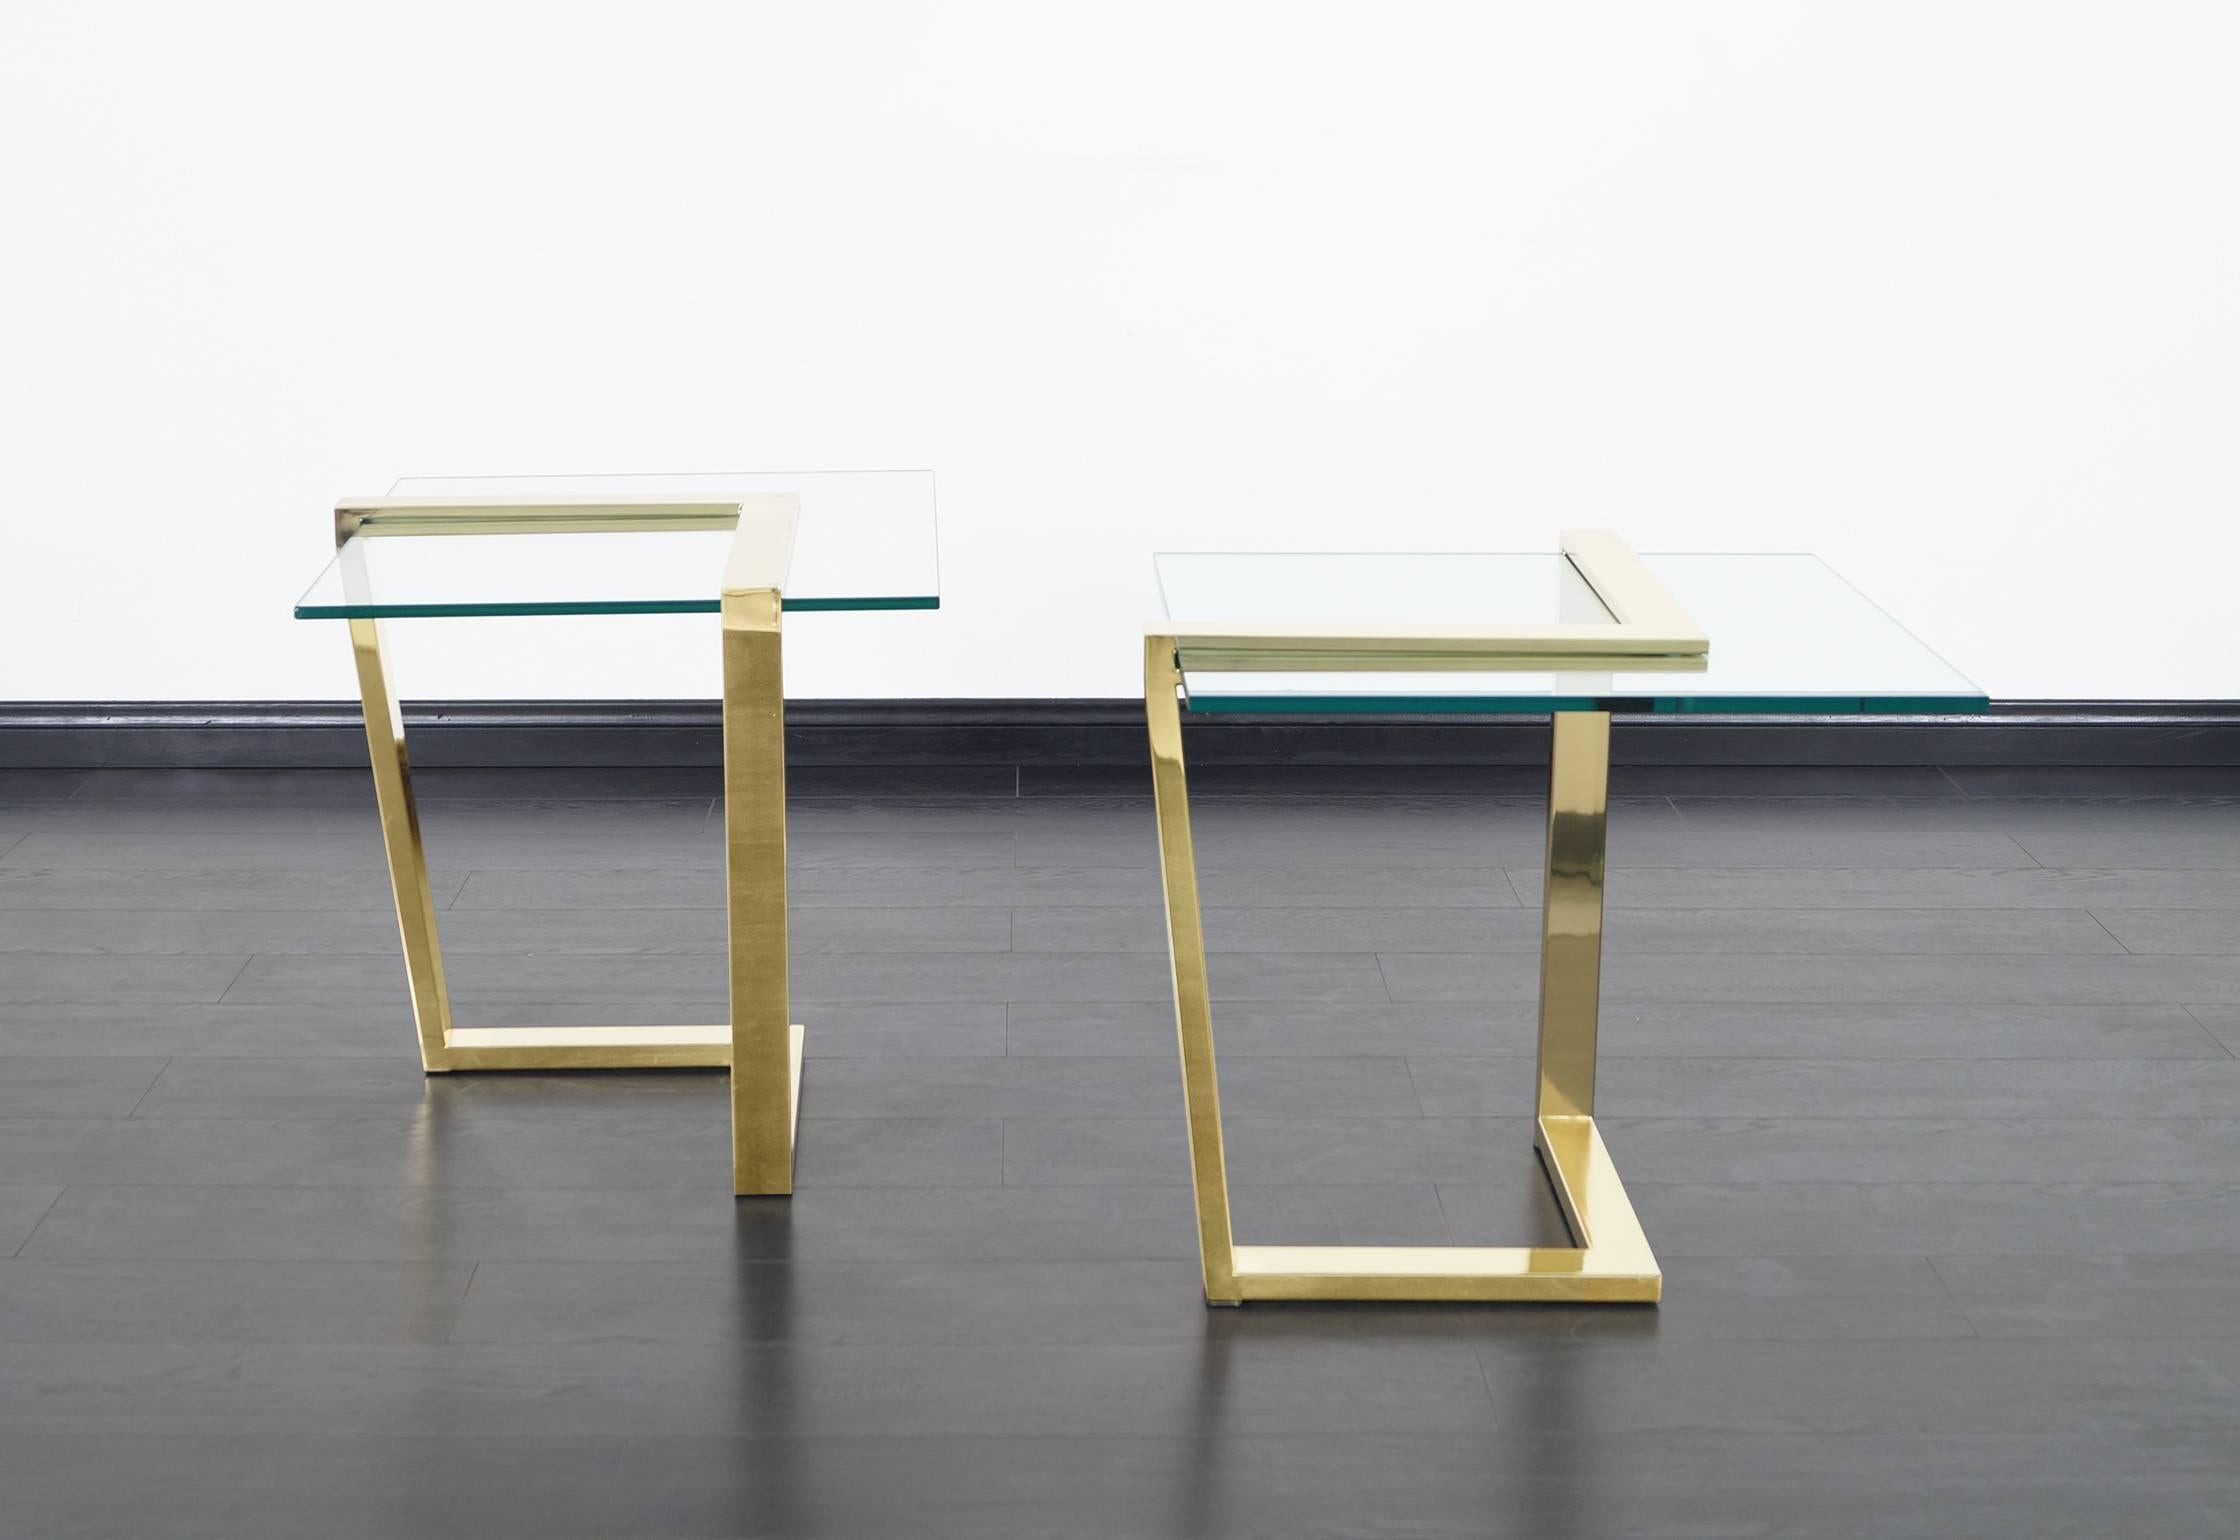 Elegant vintage brass cantilevered side tables manufactured by DIA (Design Institute of America), circa 1980s. These tables have a modernist design in which the architecturally constructed chevron-shaped polished brass bases stand out. The bases